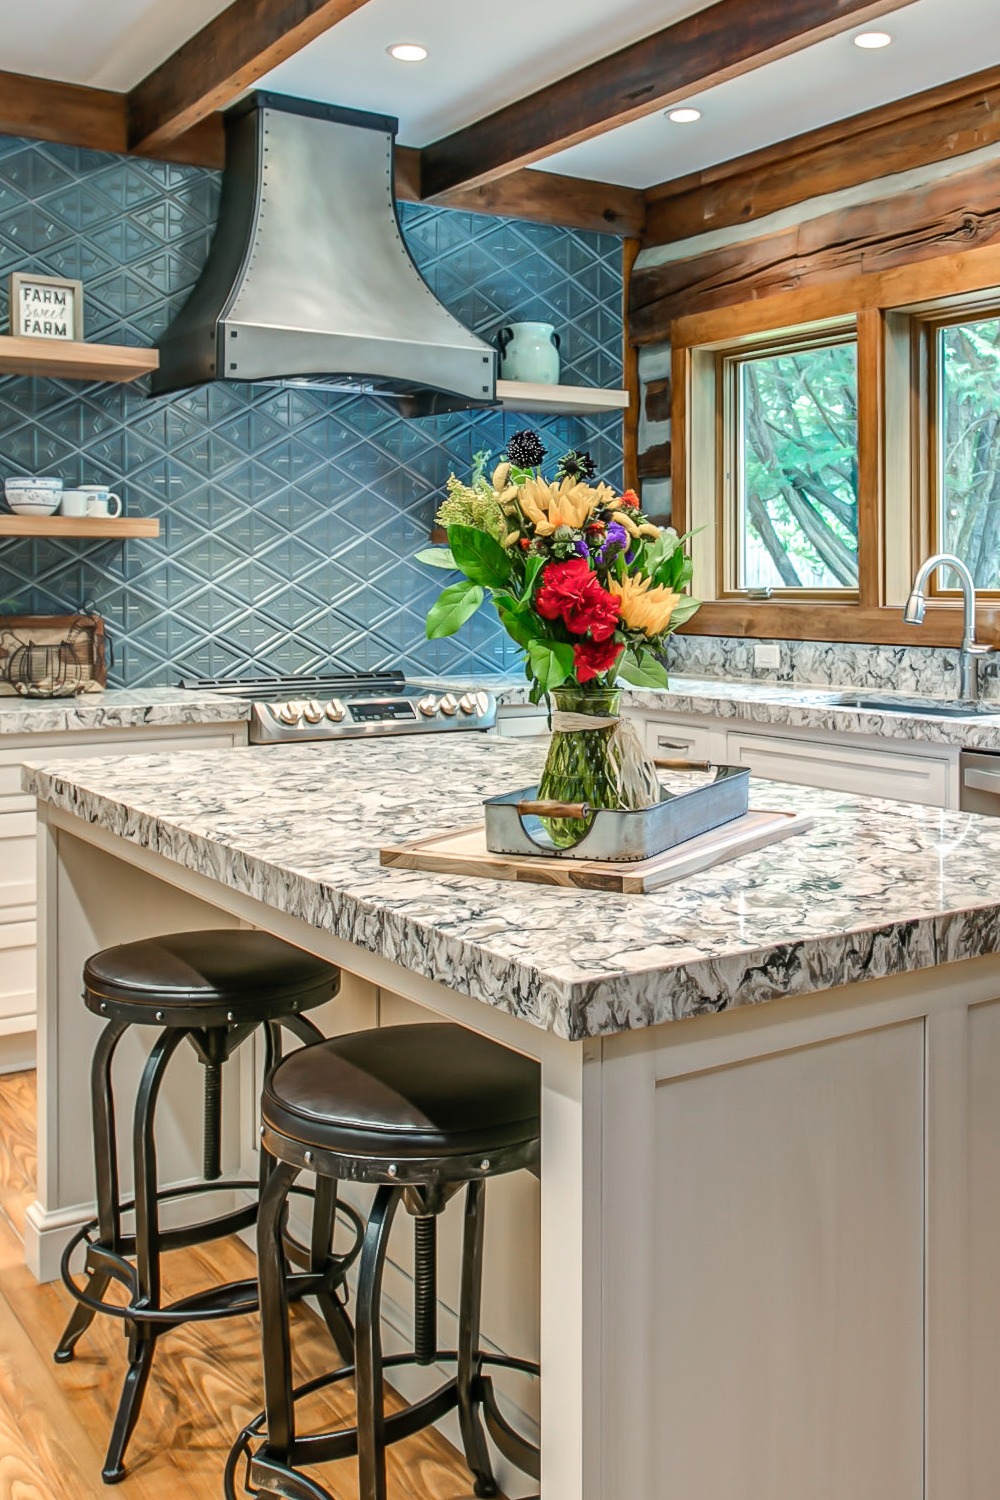 Marble Countertops Patterned Tile Bold Statement Gold Accents Paint Color Palette Warm Colors Green Blue Light